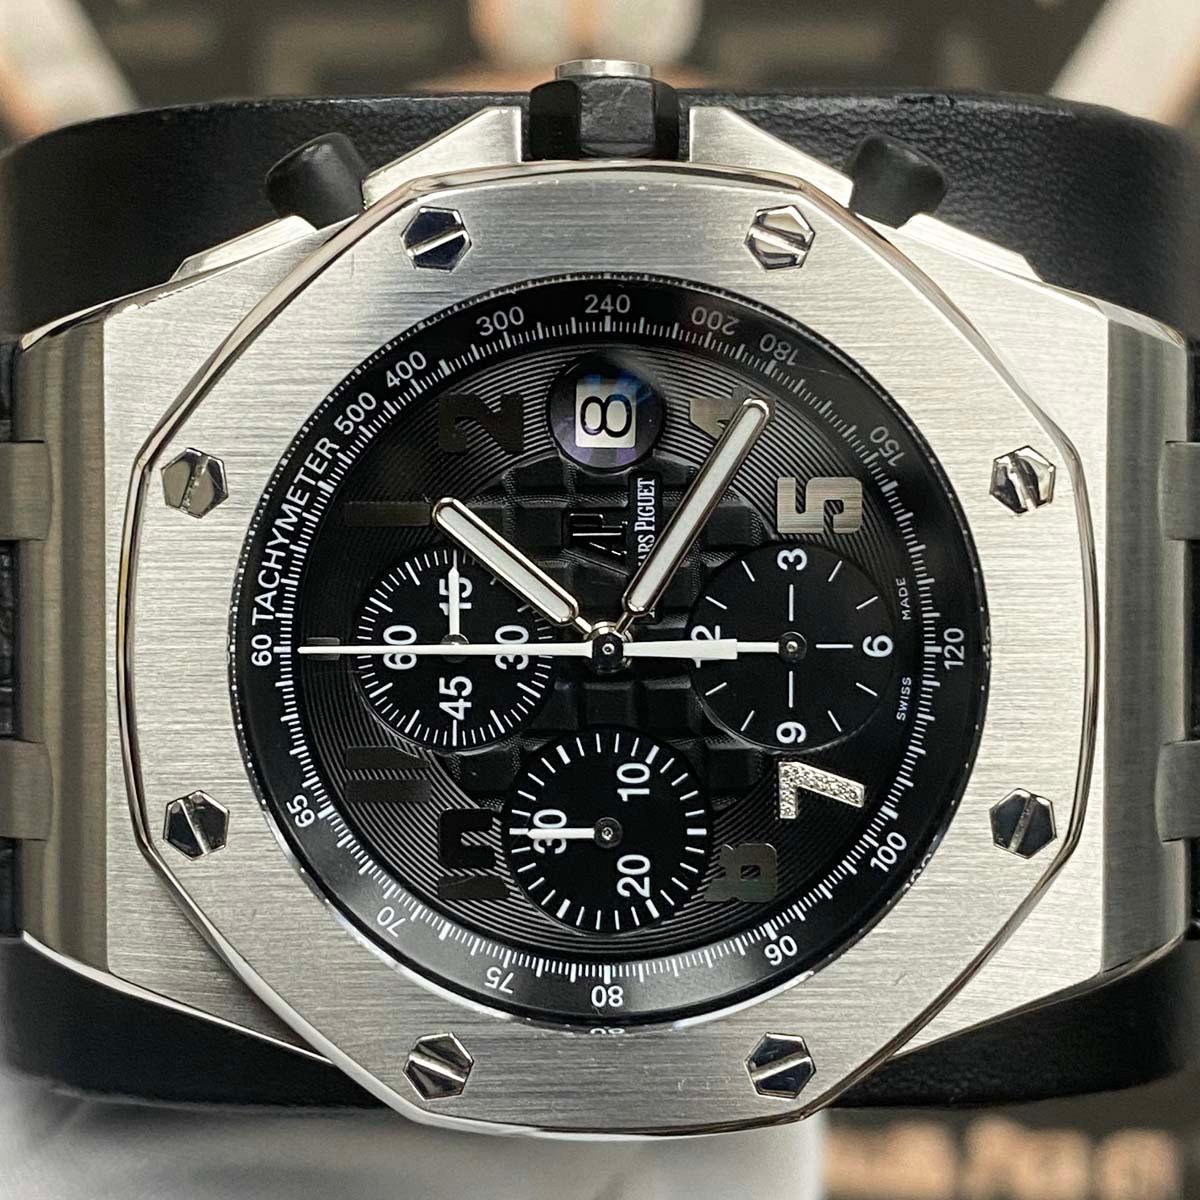 Audemars Piguet Limited Edition Ginza 7 Royal Oak Offshore Chronograph 26180ST Black Dial Pre-Owned - Gotham Trading 